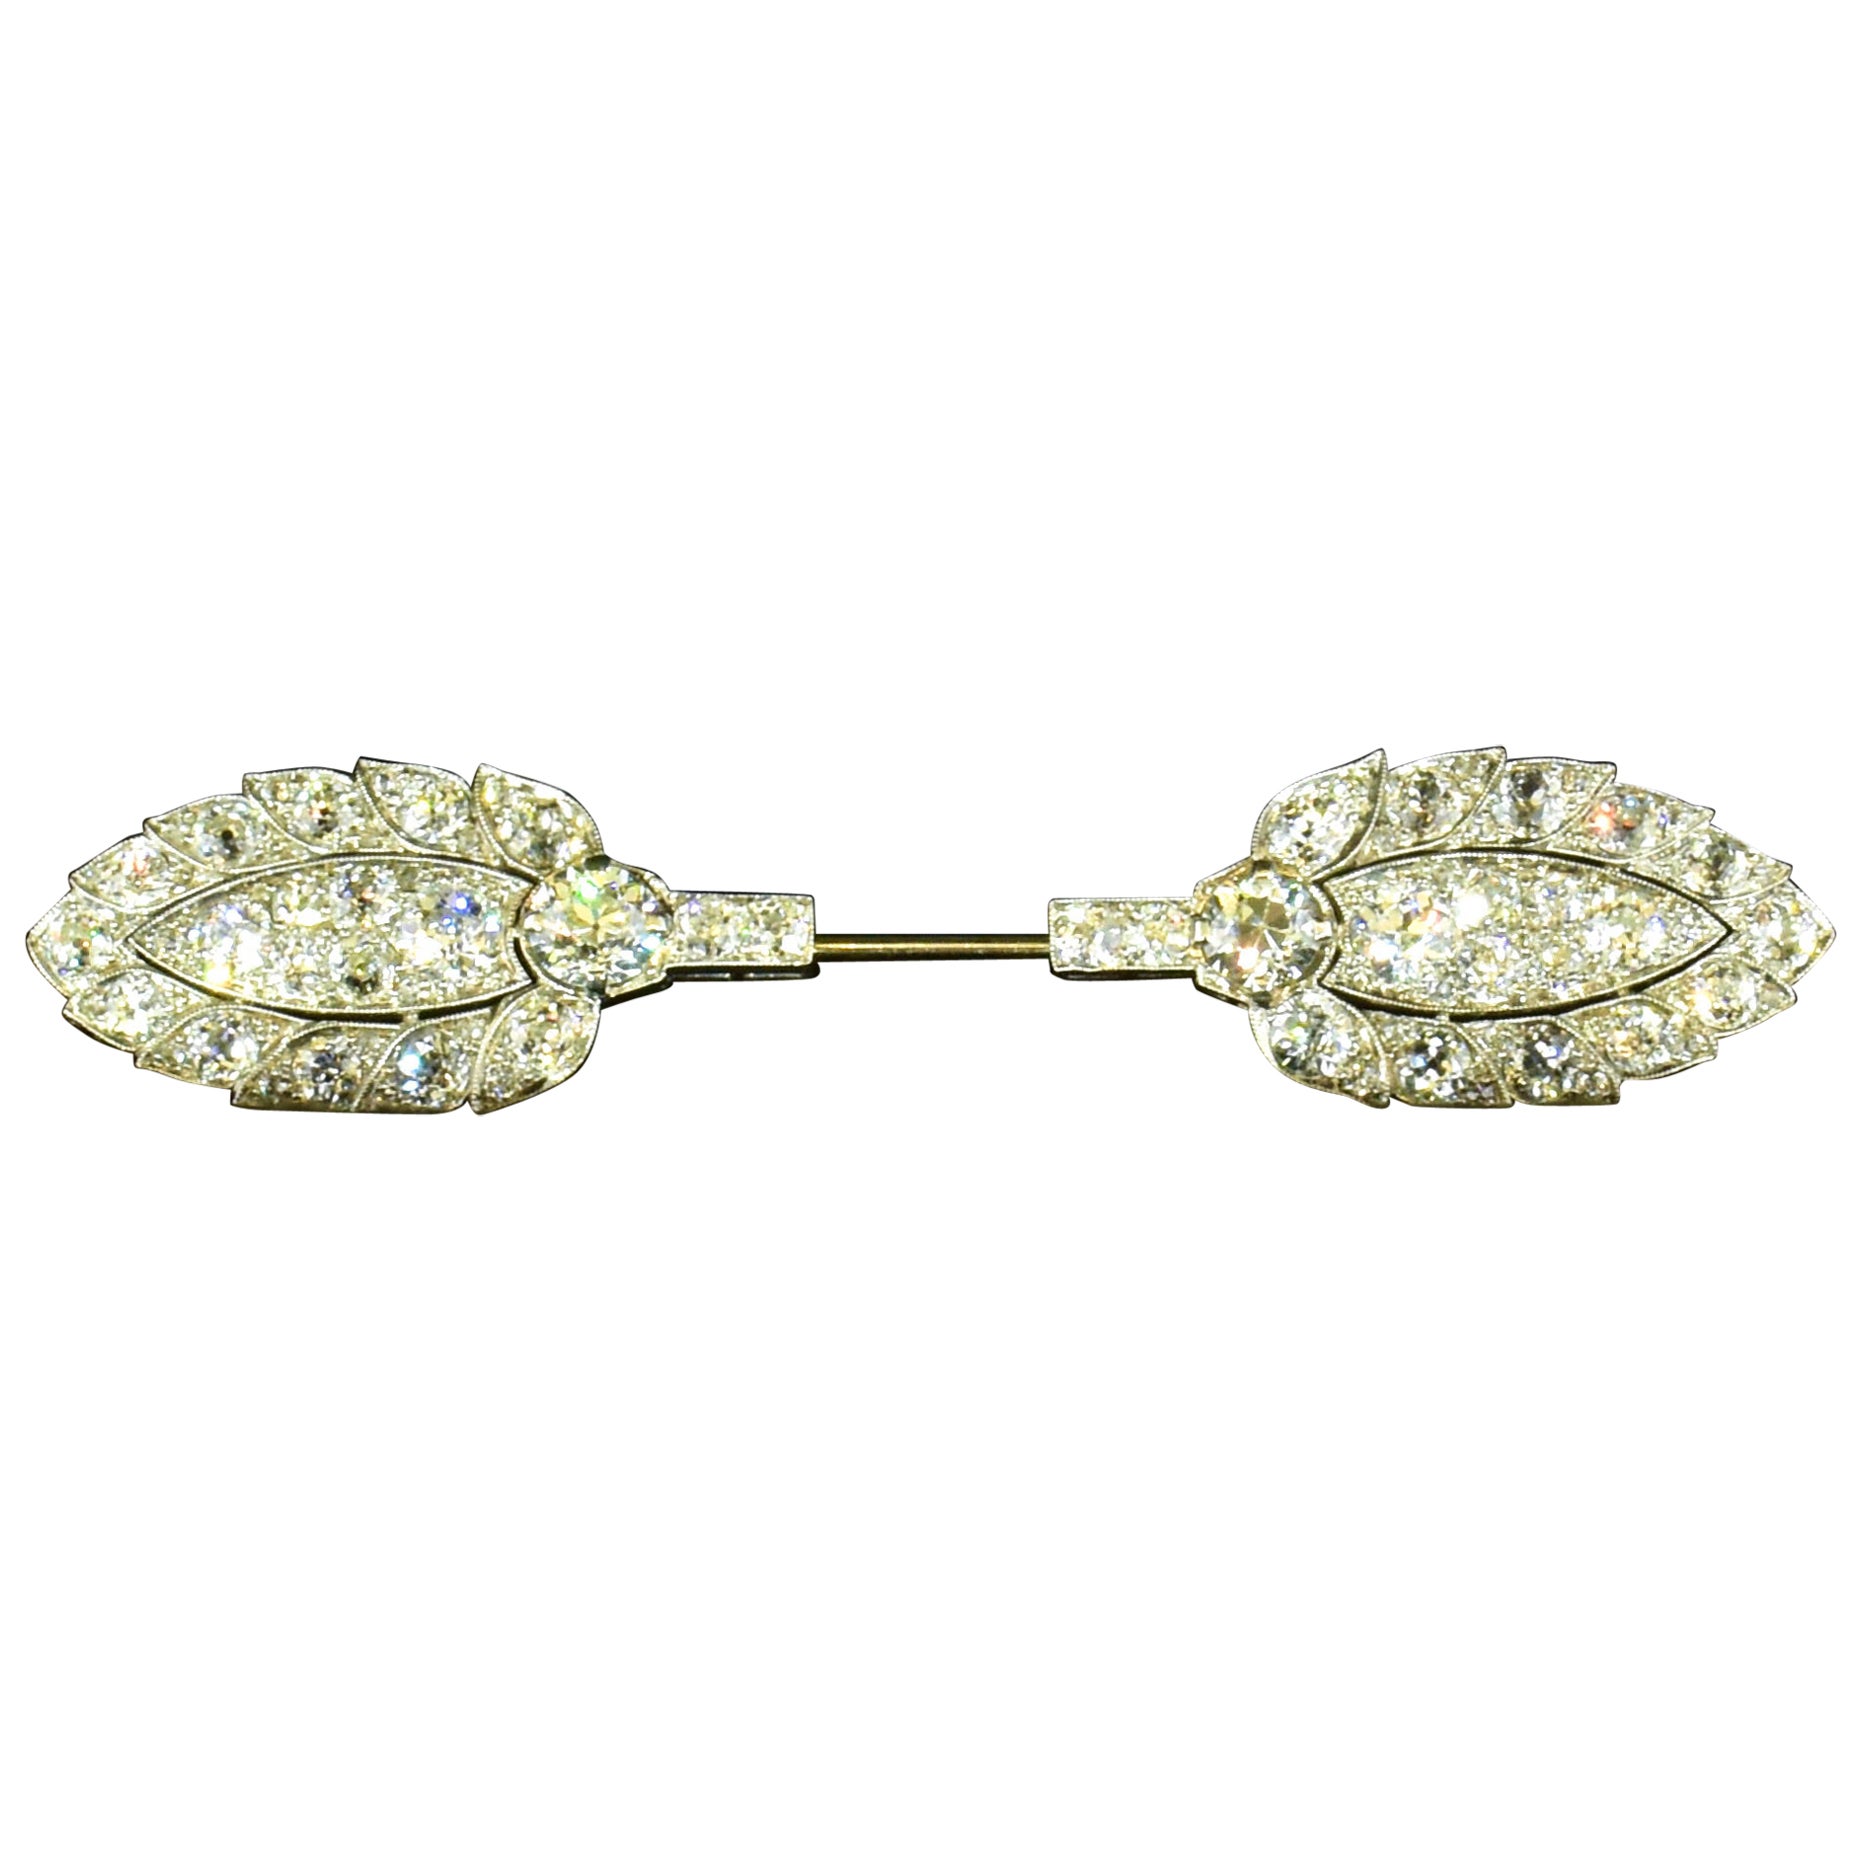 Cartier Edwardian Antique diamond and platinum jabot or Cliquet Pin, c. 1914.  Whether we call it late Edwardian or early Art Deco, the cliquet pin was a specialized brooch where only the two visible decorative elements are seen; the platinum bar is